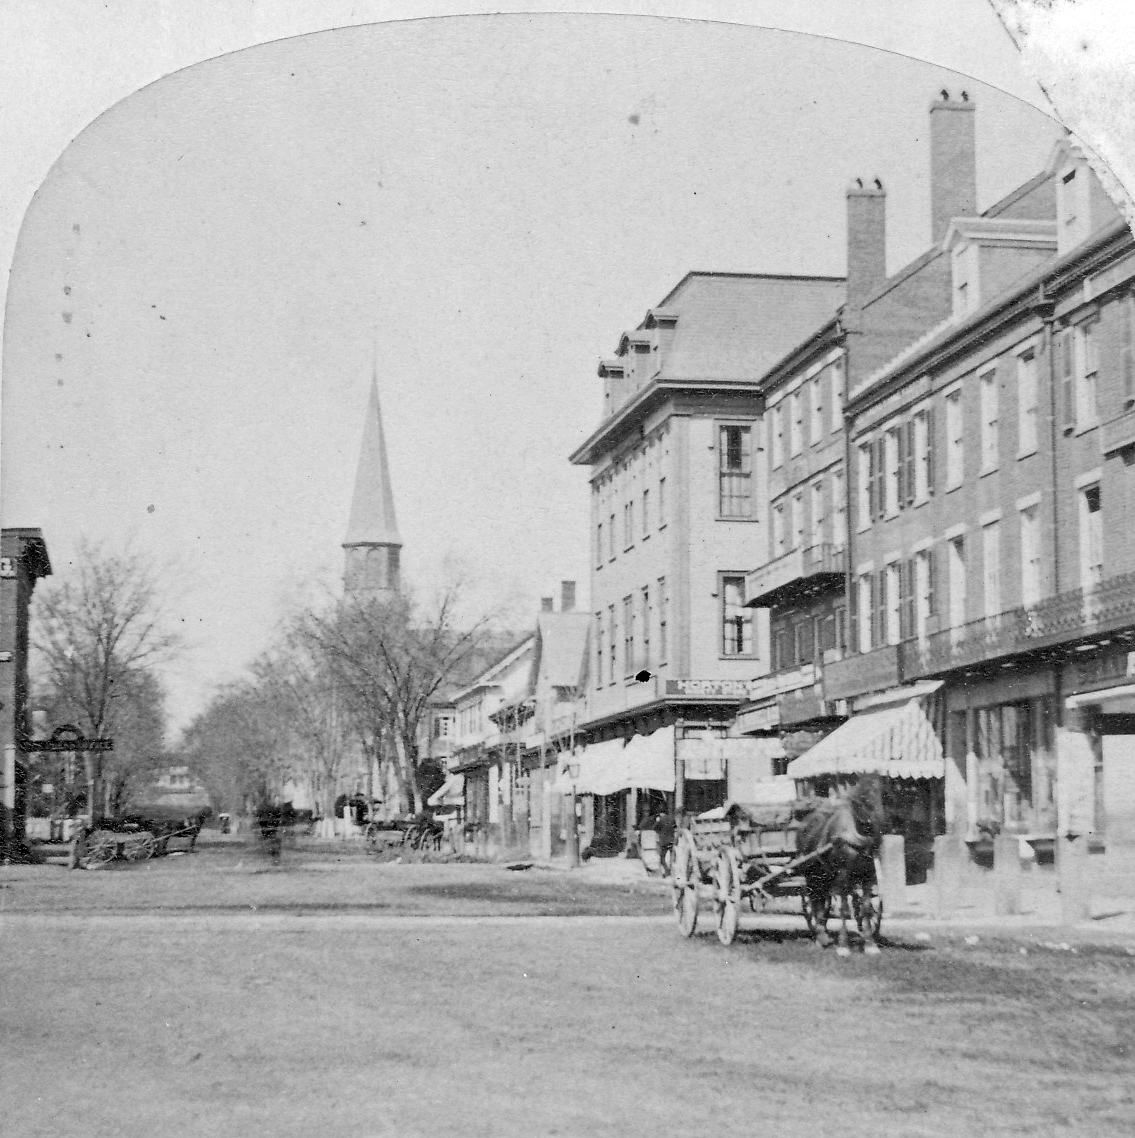 Washington Street looking west from Central Square